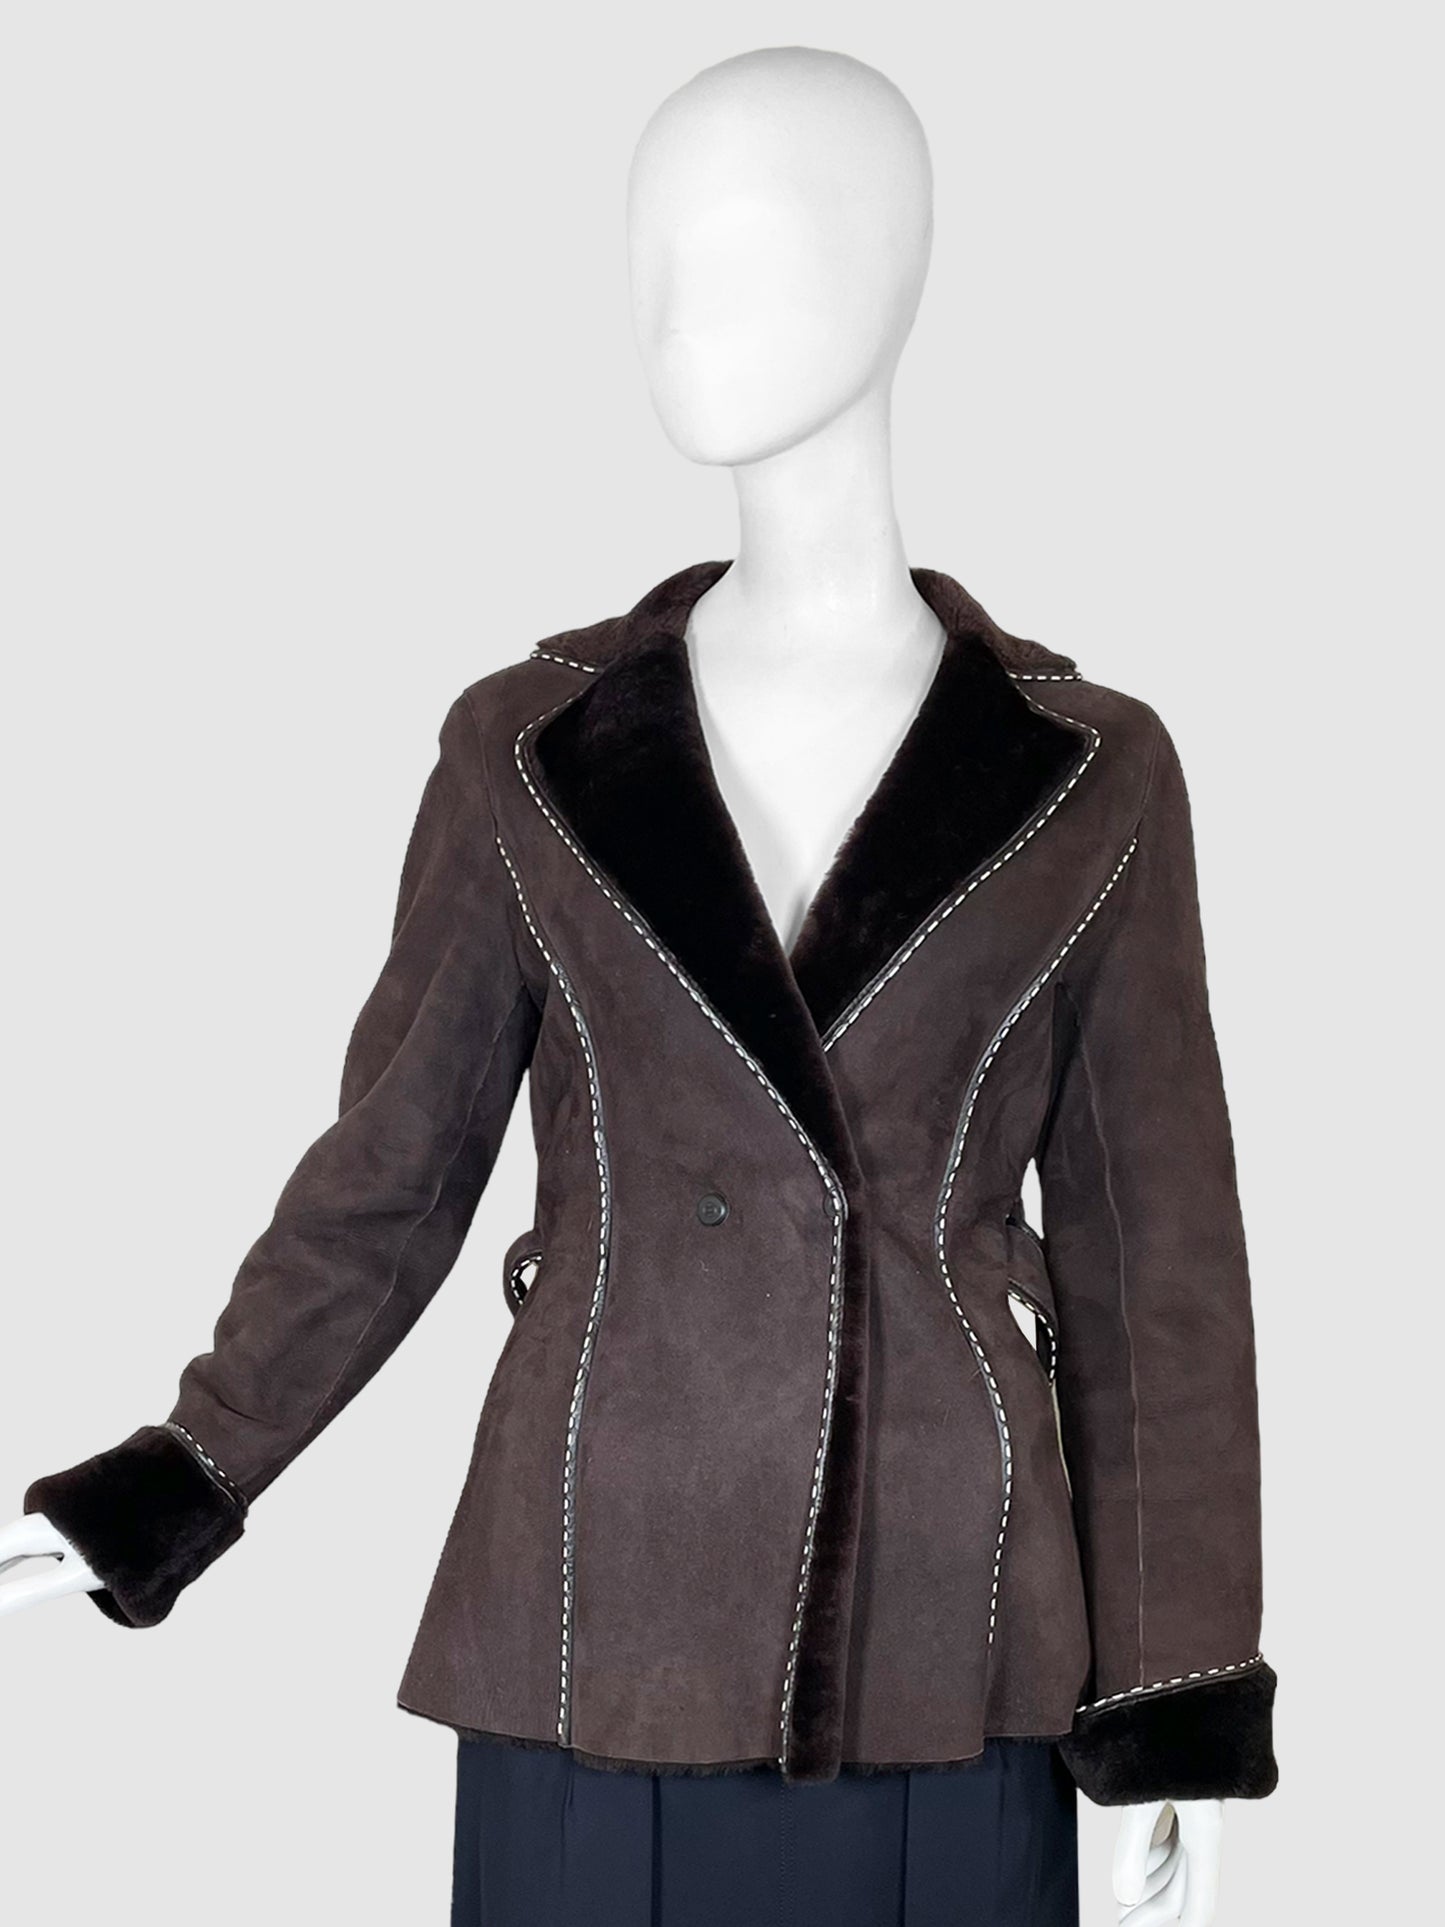 Escada Suede with Shearling Trim Coat - Size 34